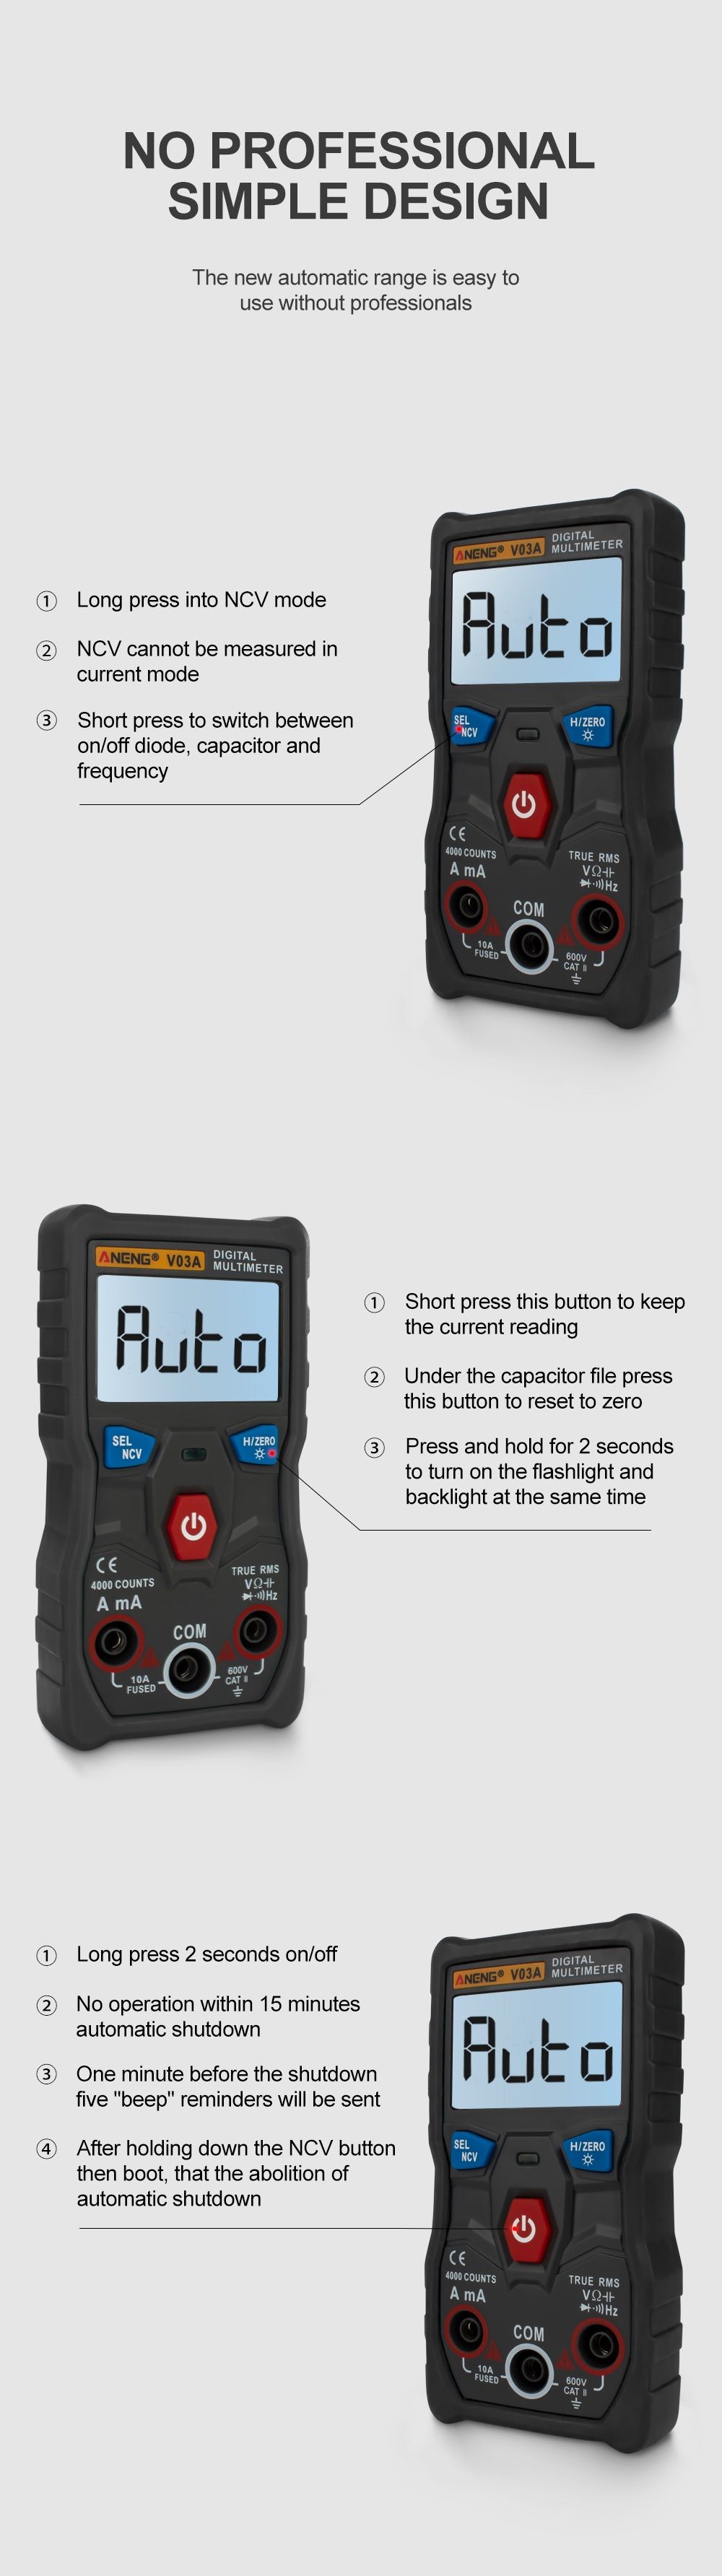 ANENG-V03A-Automatic-Intelligent-Gear-Recognition-Electrician-NCV-Pocket-True-RMS-Digital-Multimeter-1474250